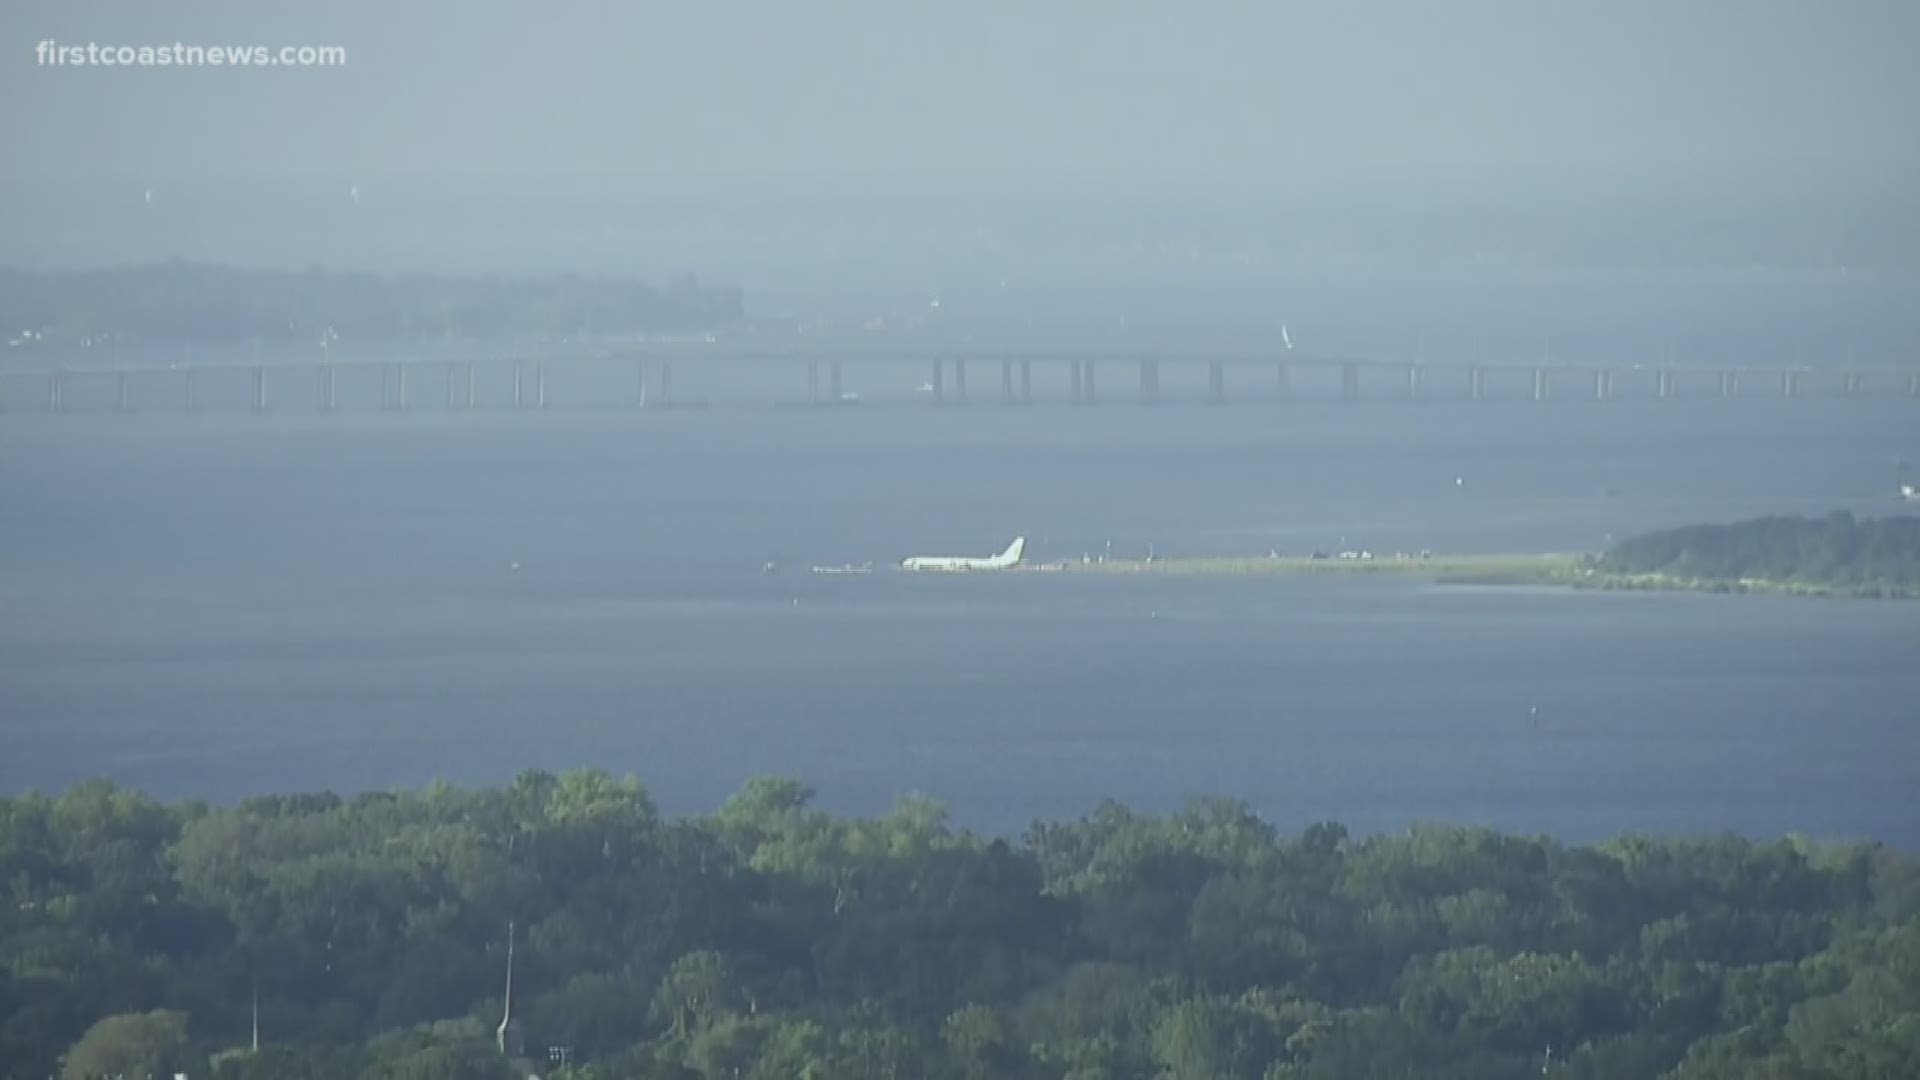 The Boeing 737-800 civilian aircraft was carrying 142 people when it skidded off the runway and into the St. Johns River near the NAS Jax airport Friday around 9:40 p.m. No serious injuries were reported.